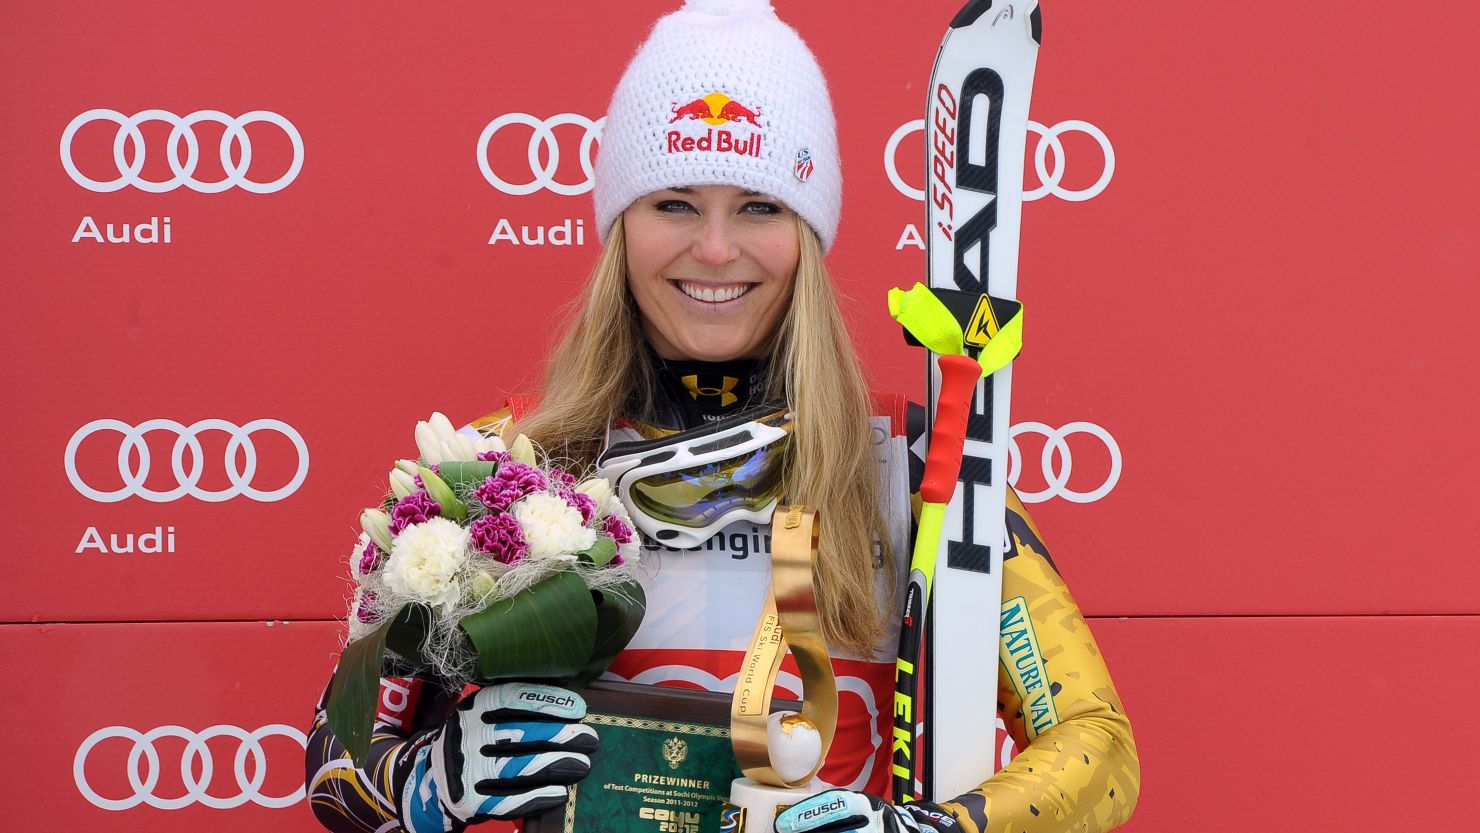 Lindsey Vonn finished third at Saturday's race in Sochi but it was enough to clinch the World Cup downhill title